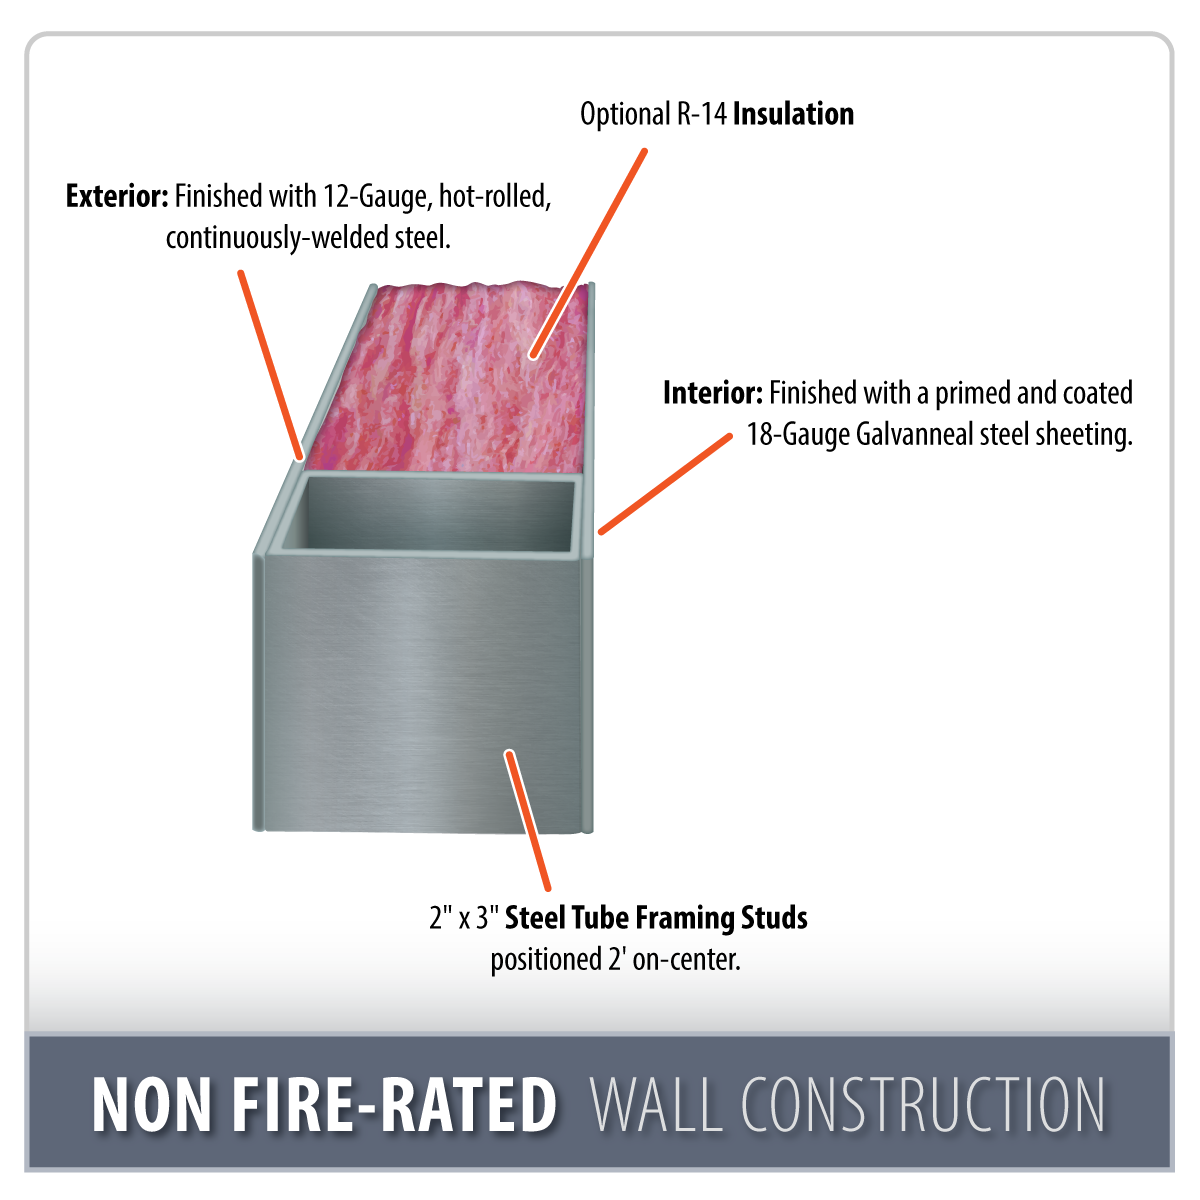 Non Fire-Rated Wall Construction Feature